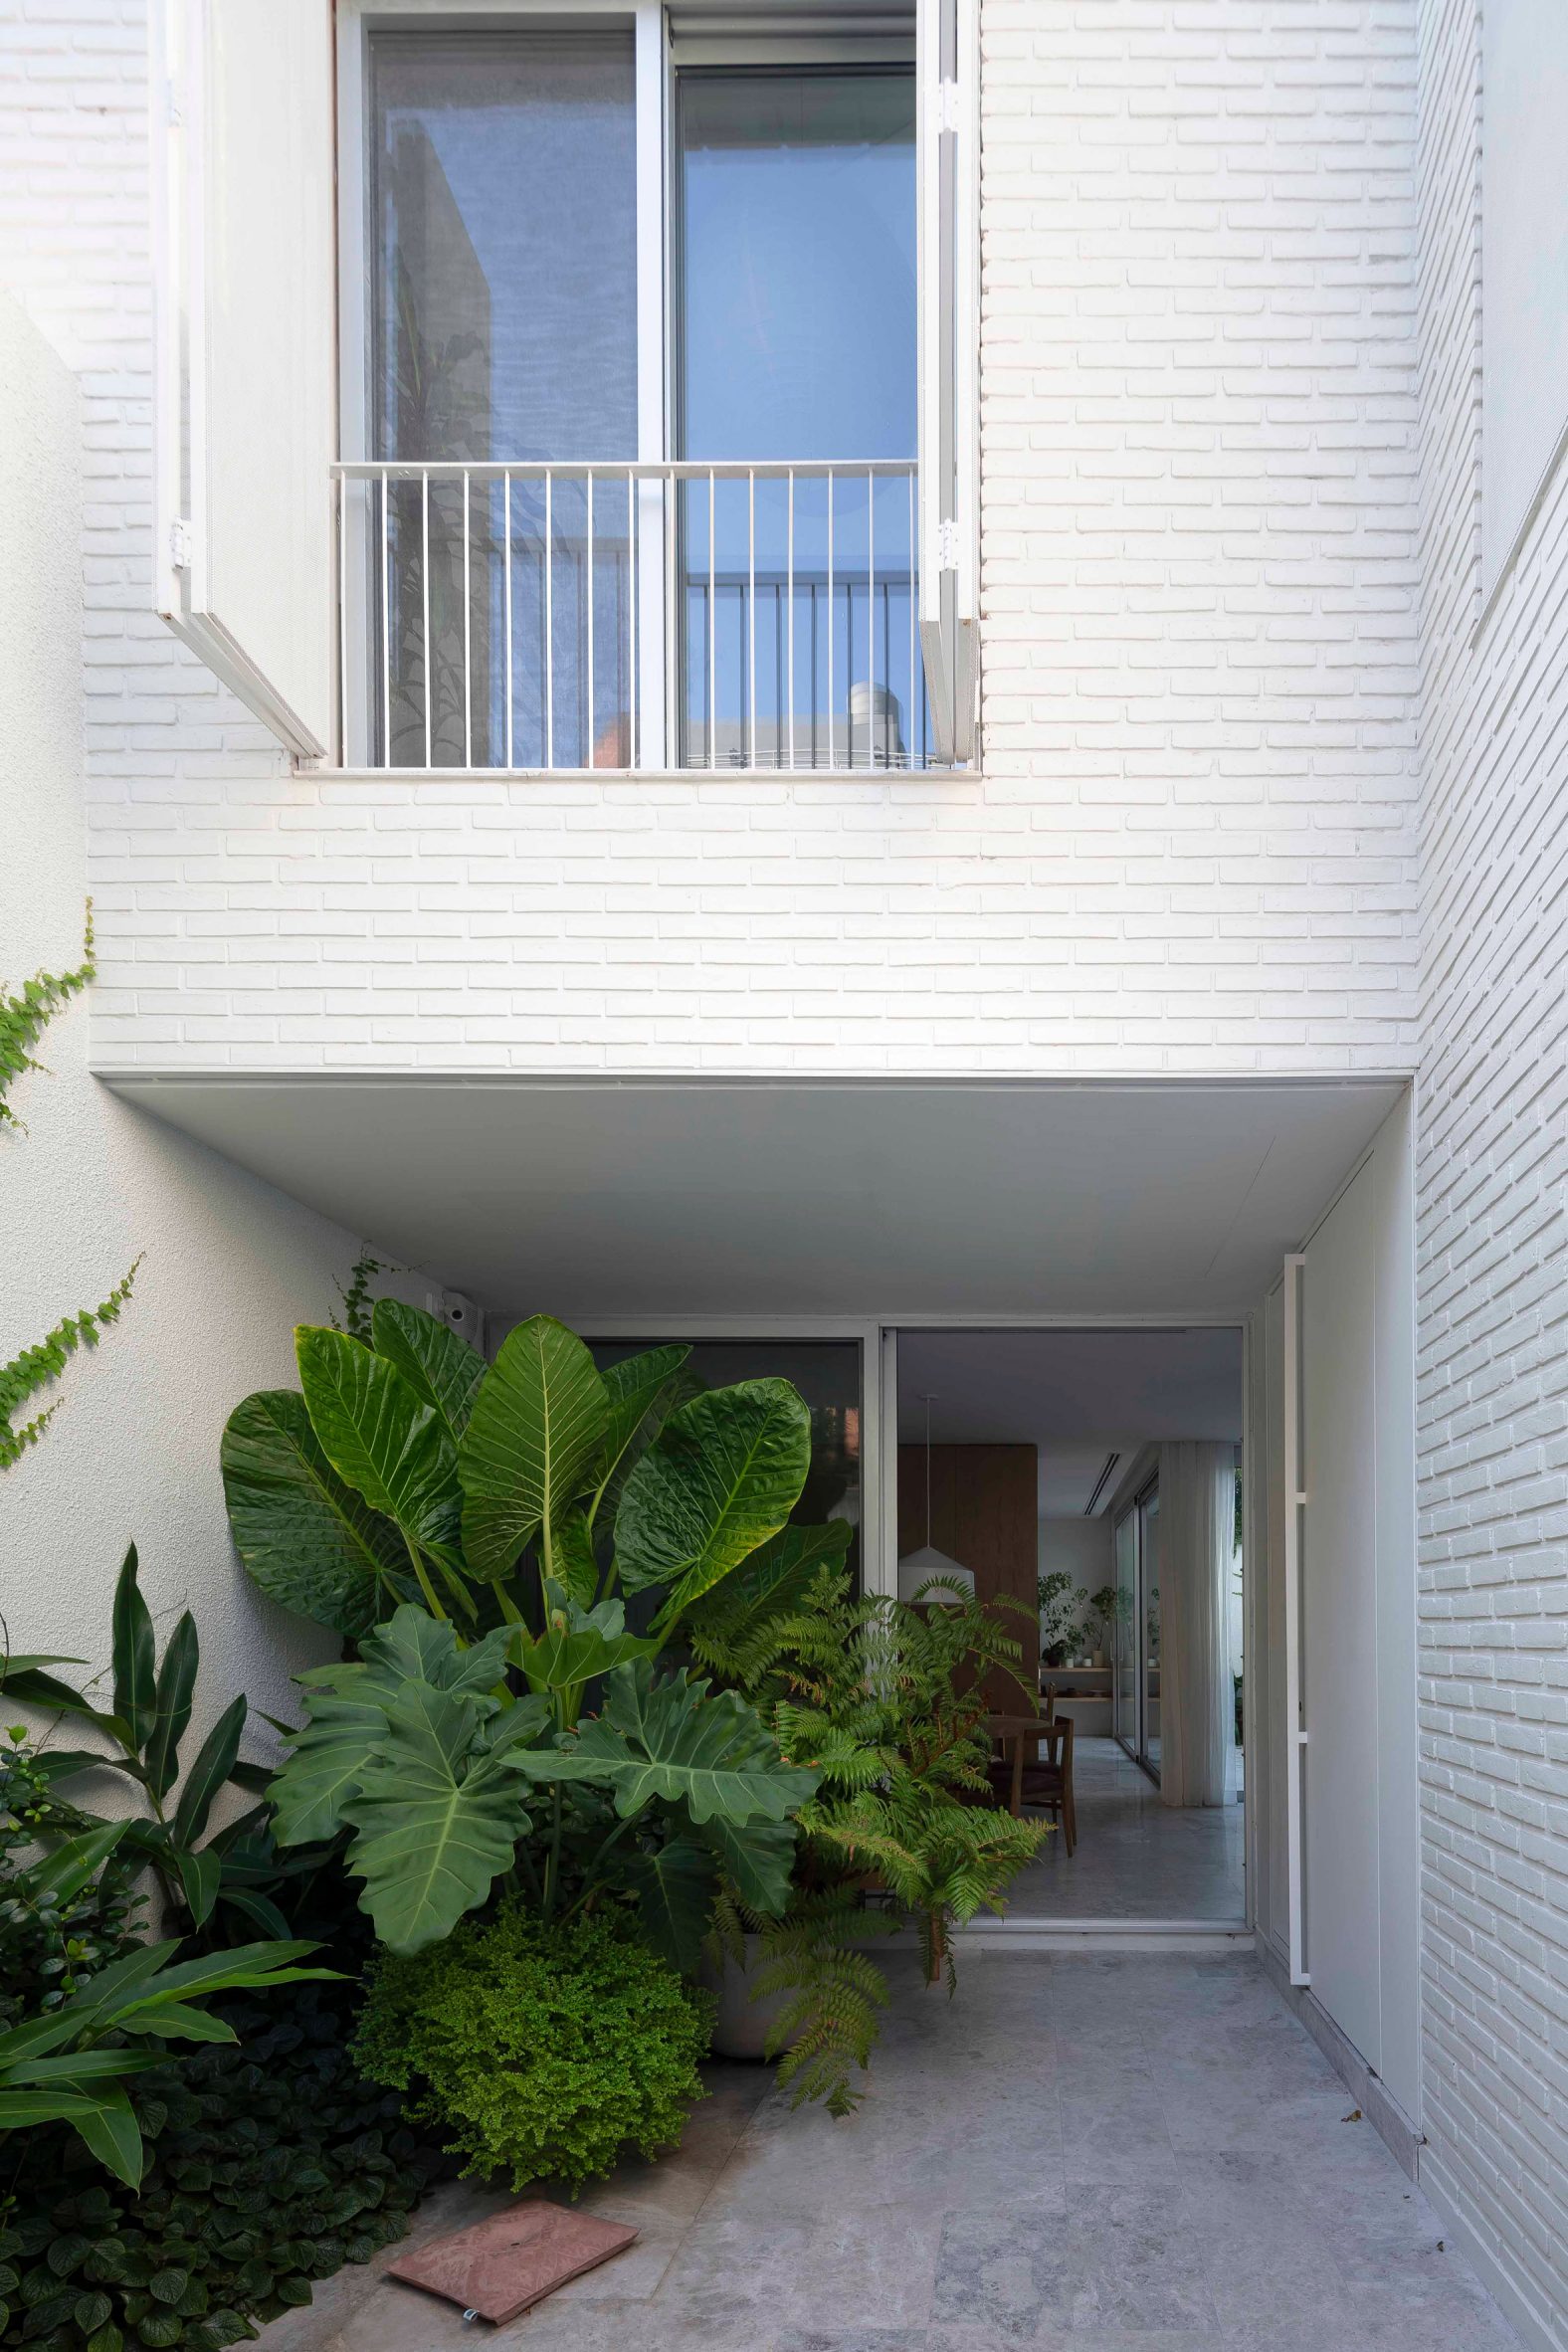 Courtyard at Casa Vedia by BHY Arquitectos